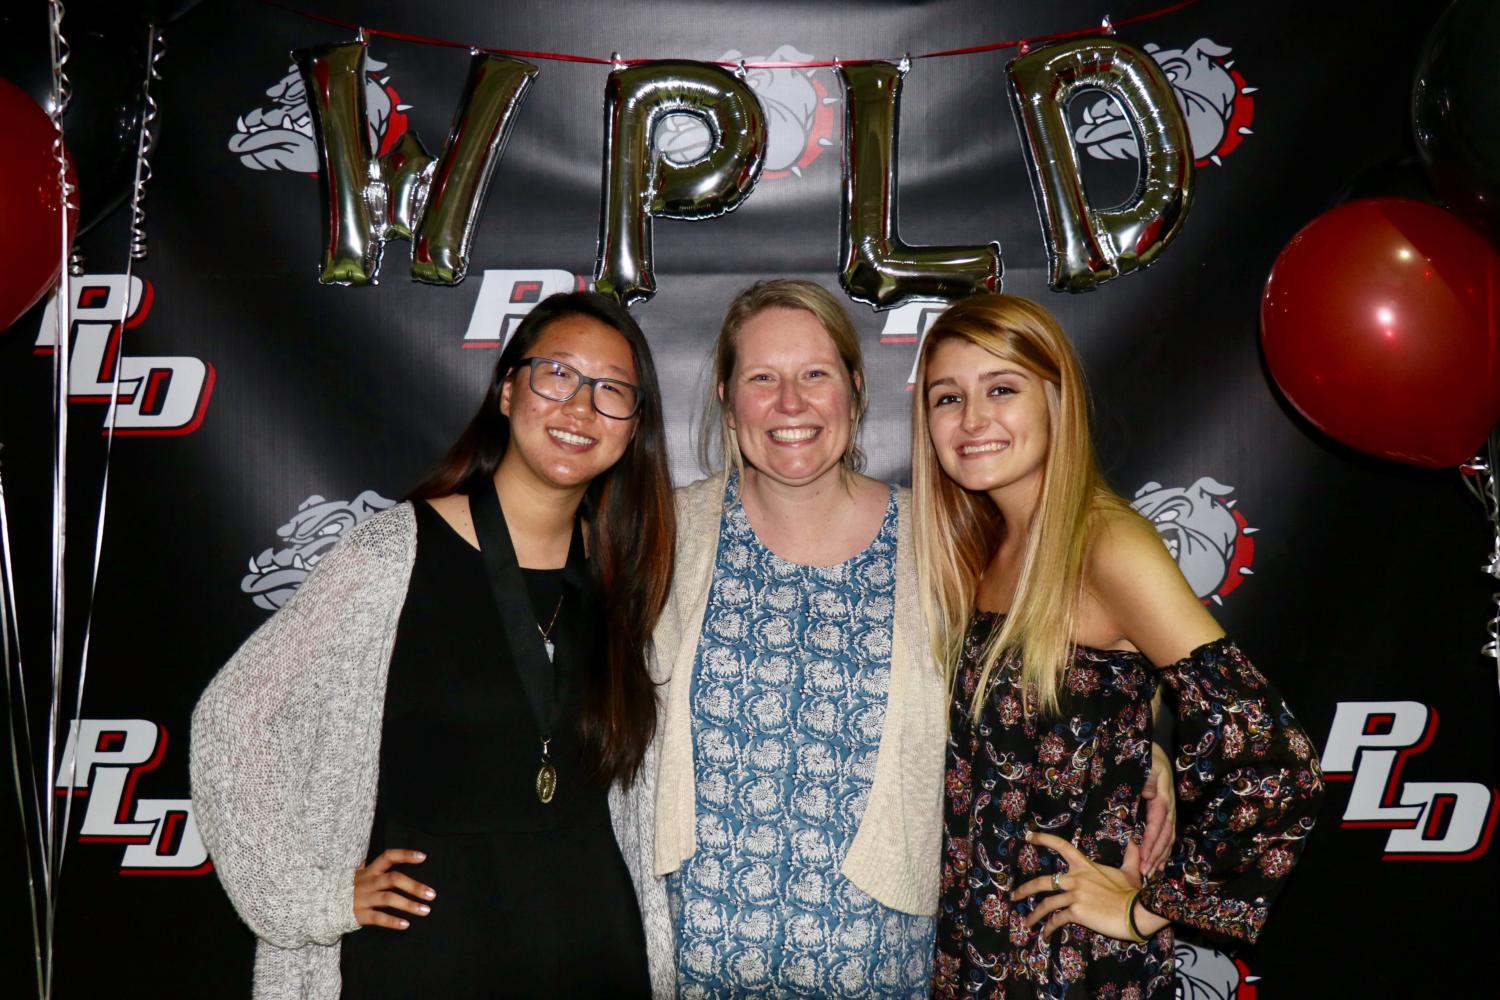 Editors-in-Chief Emily Liu and Brooke Bledsoe with Lamplighter advisor Wendy Turner